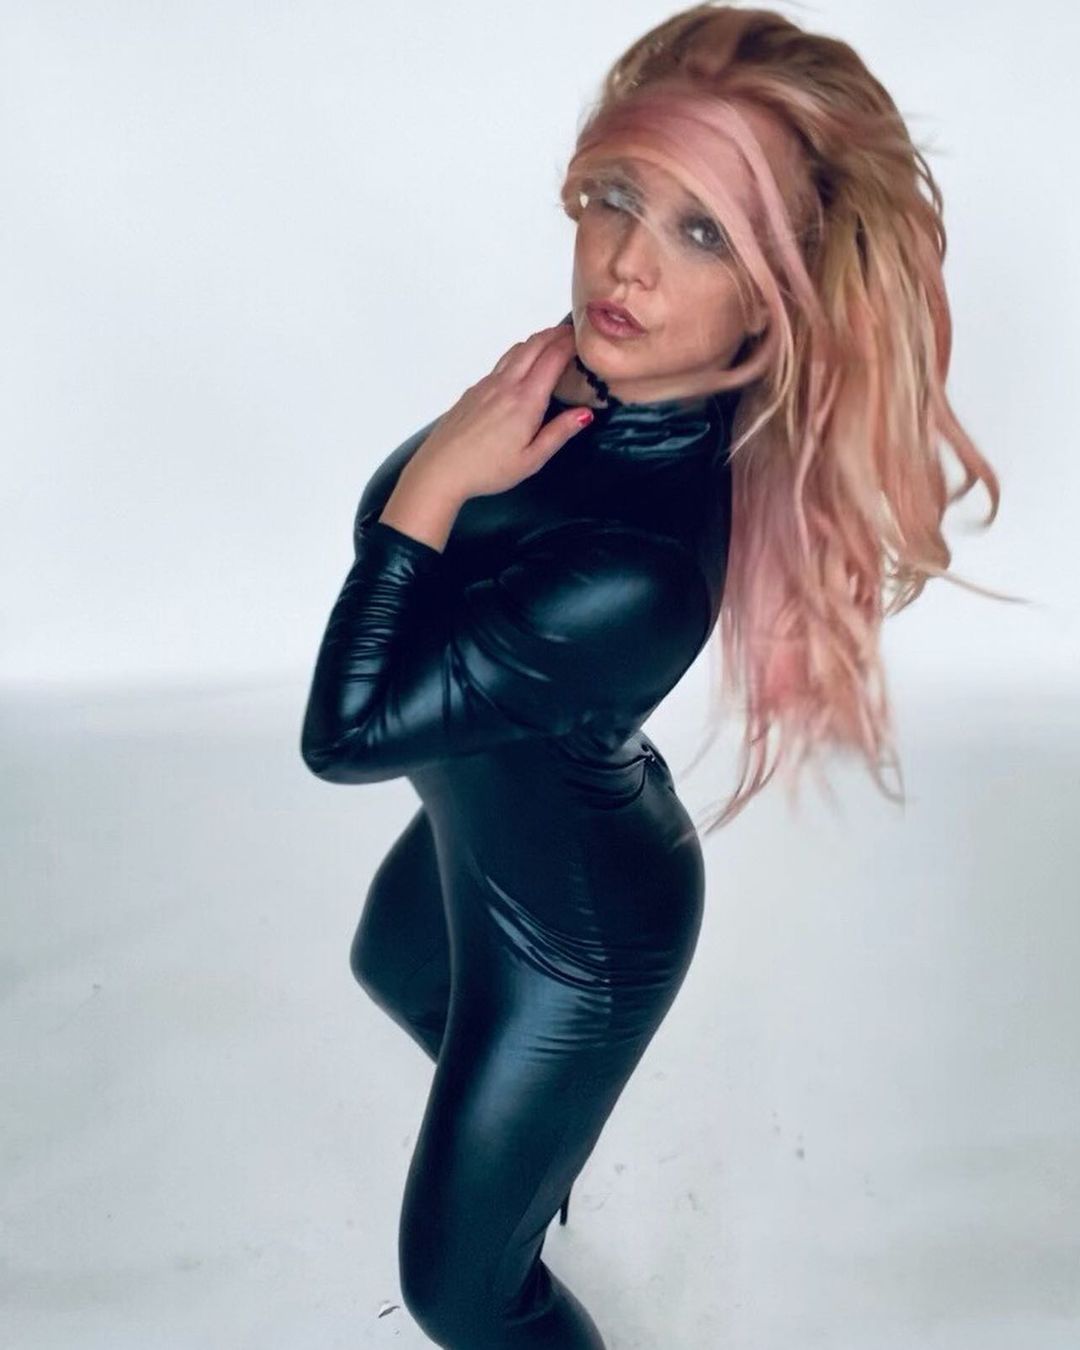 Britney Spears indoors in catsuit